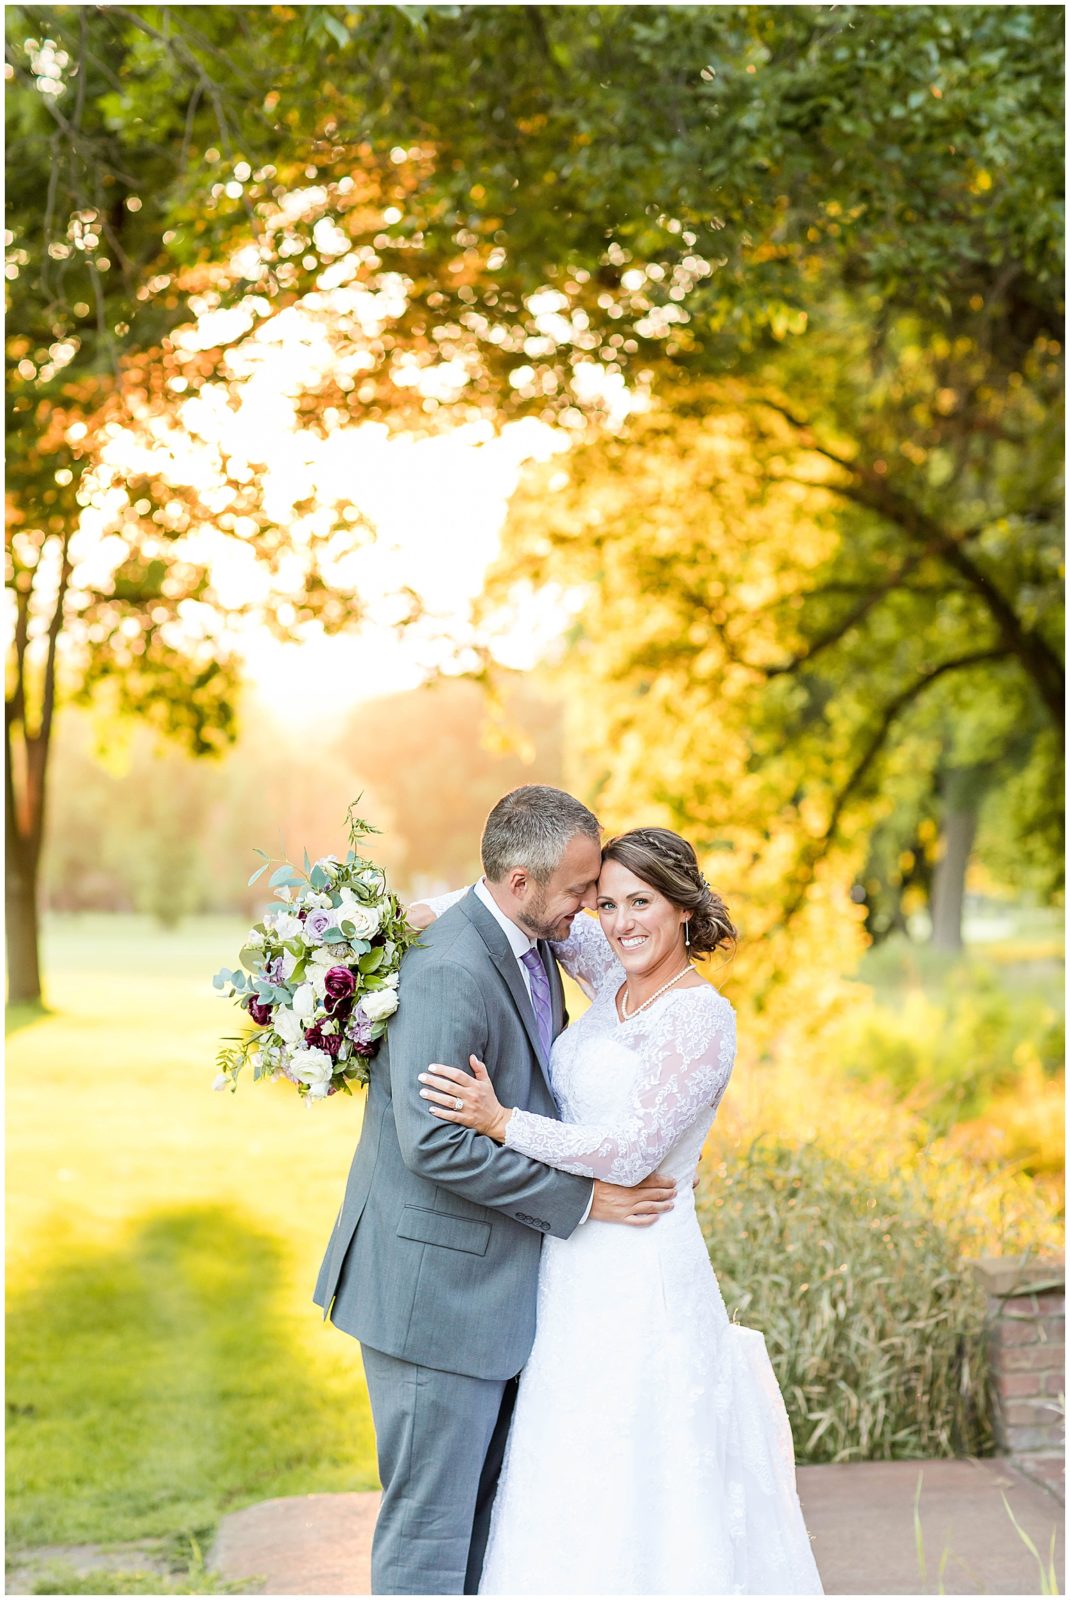 Bride and Groom Portraits | Wedding At Sioux City Country Club shot by Jessica Brees Photo & Video